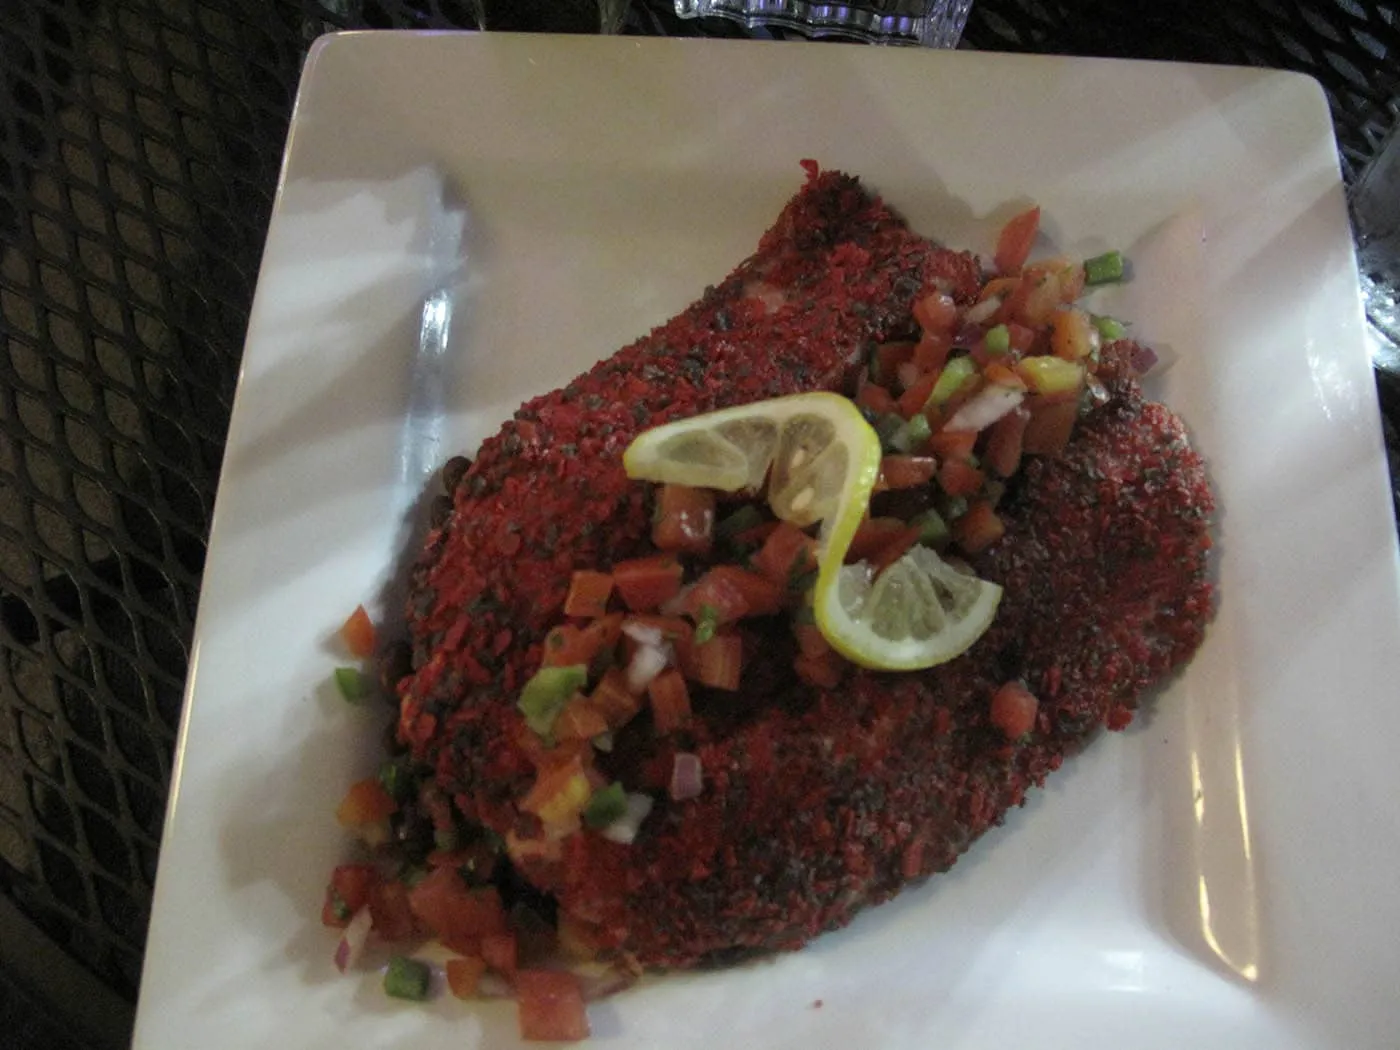 Tortilla crusted fish in downtown Charlottesville, Virginia.